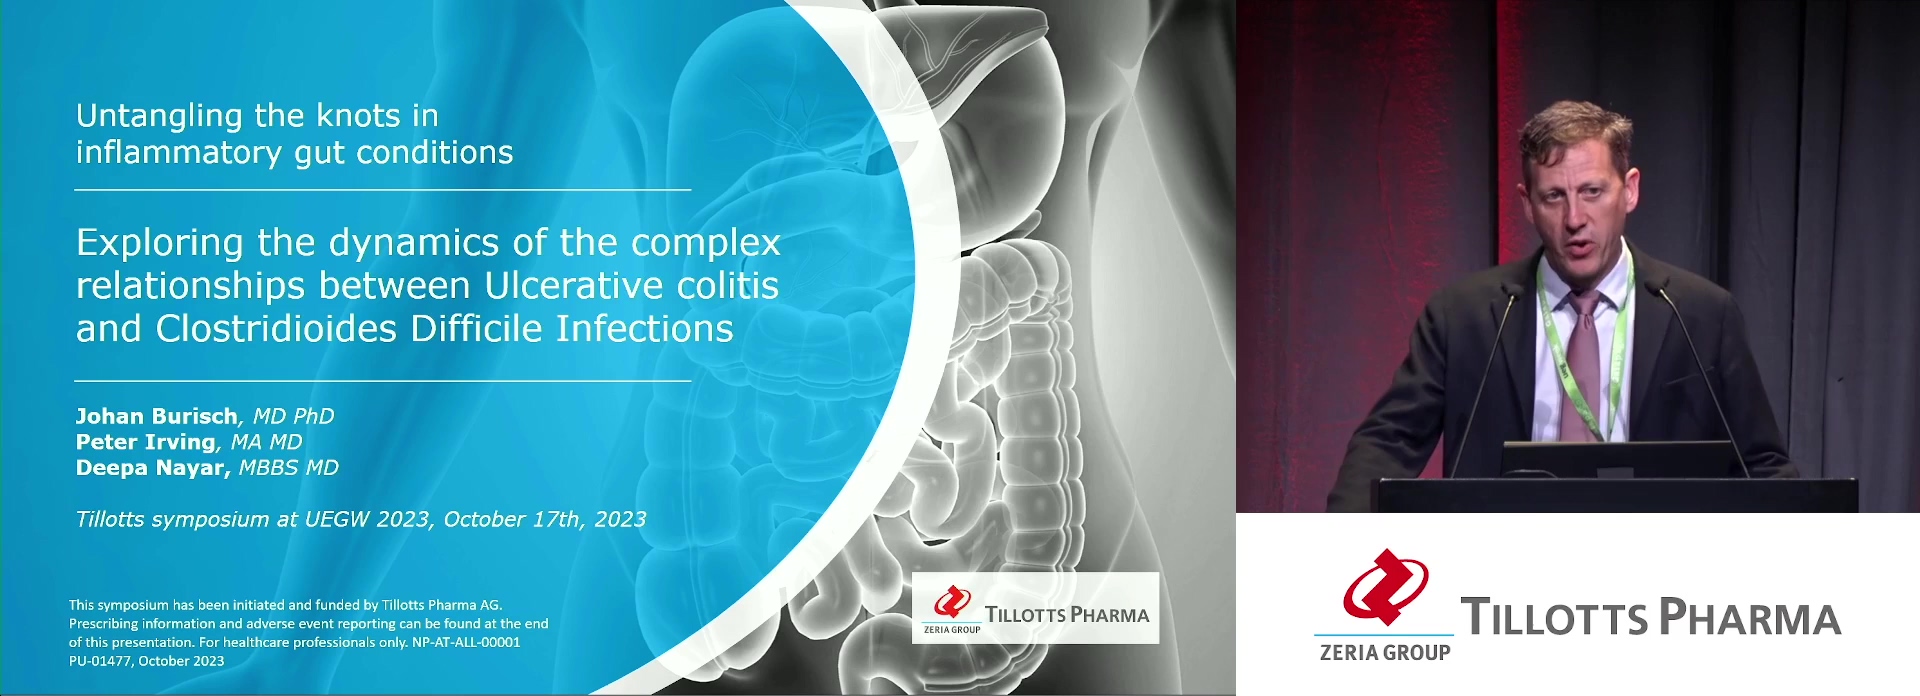 Untangling the Knots: Exploring the Dynamics of Complex Relationships between Ulcerative Colitis and Clostridioides difficile Infections (Tillotts Pharma AG) (Complete Session)